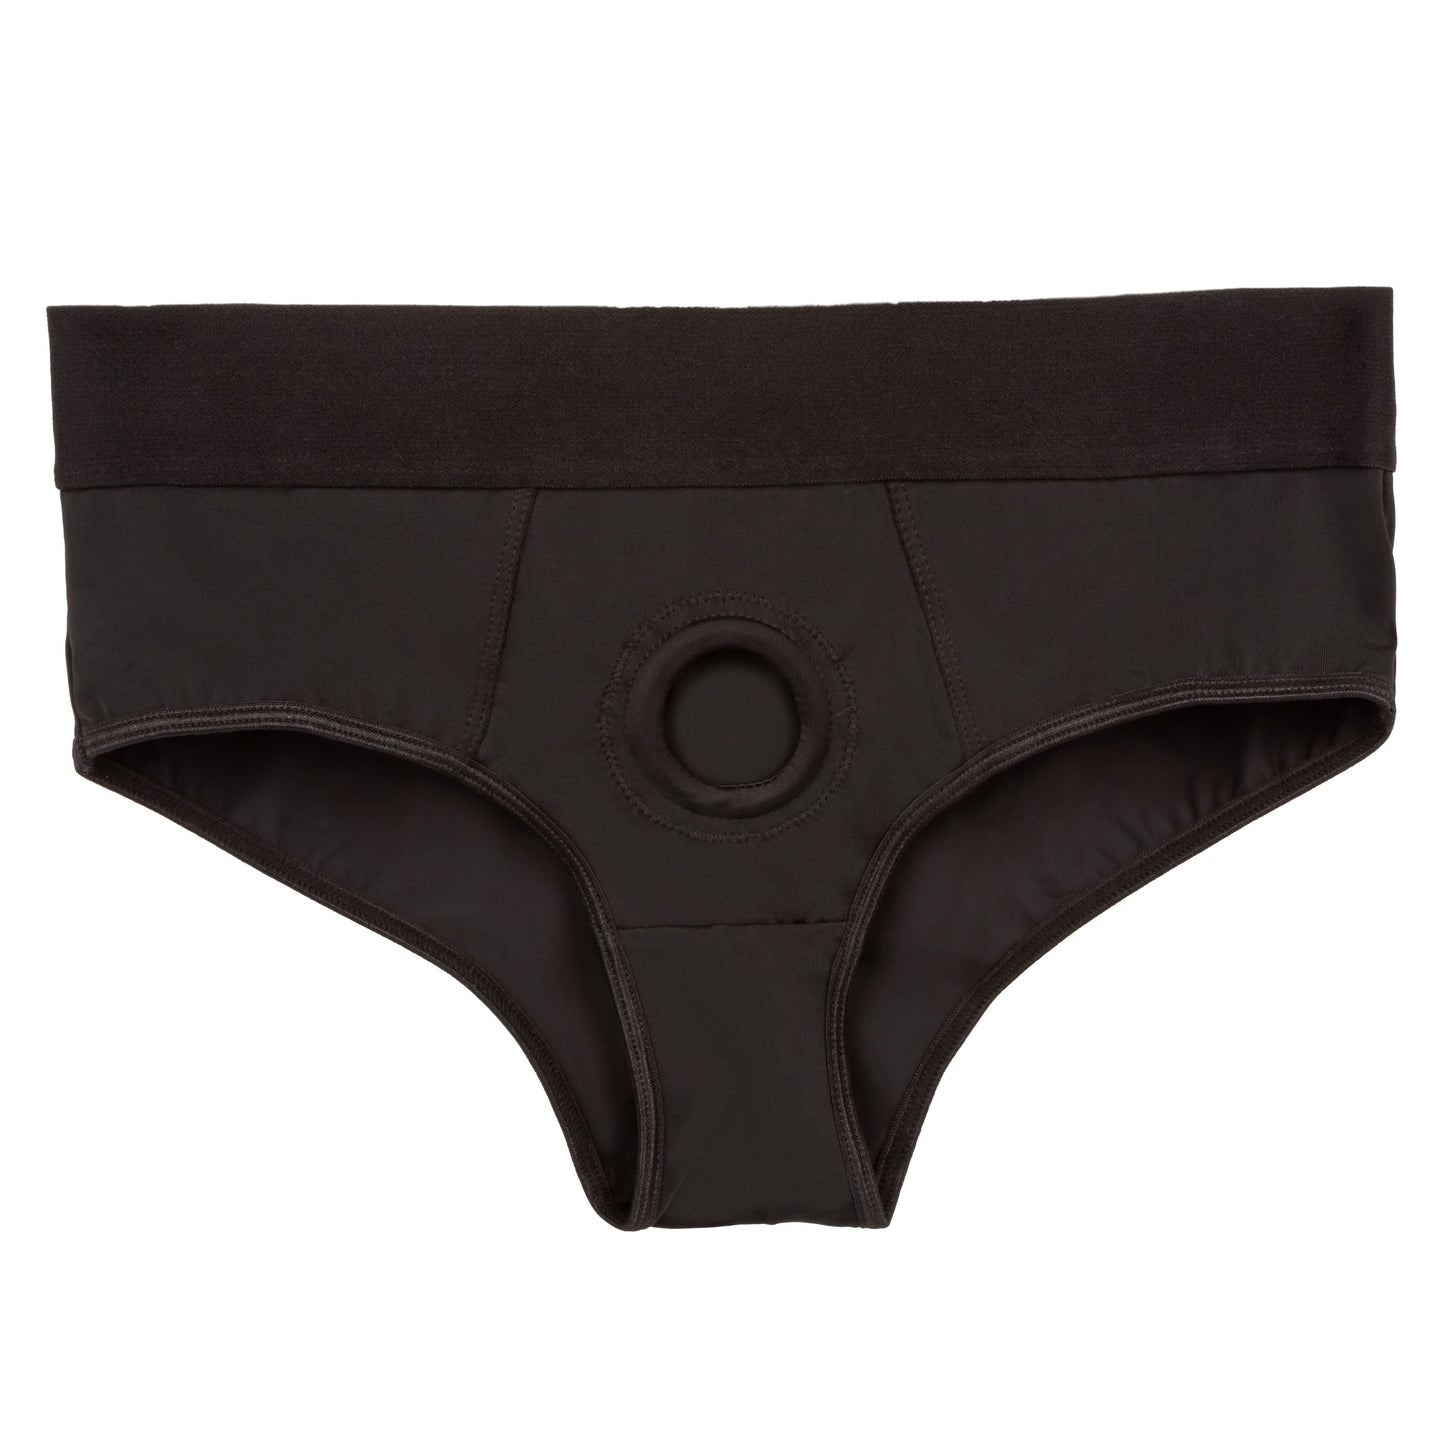 Boundless Backless Brief - L/xl - Black